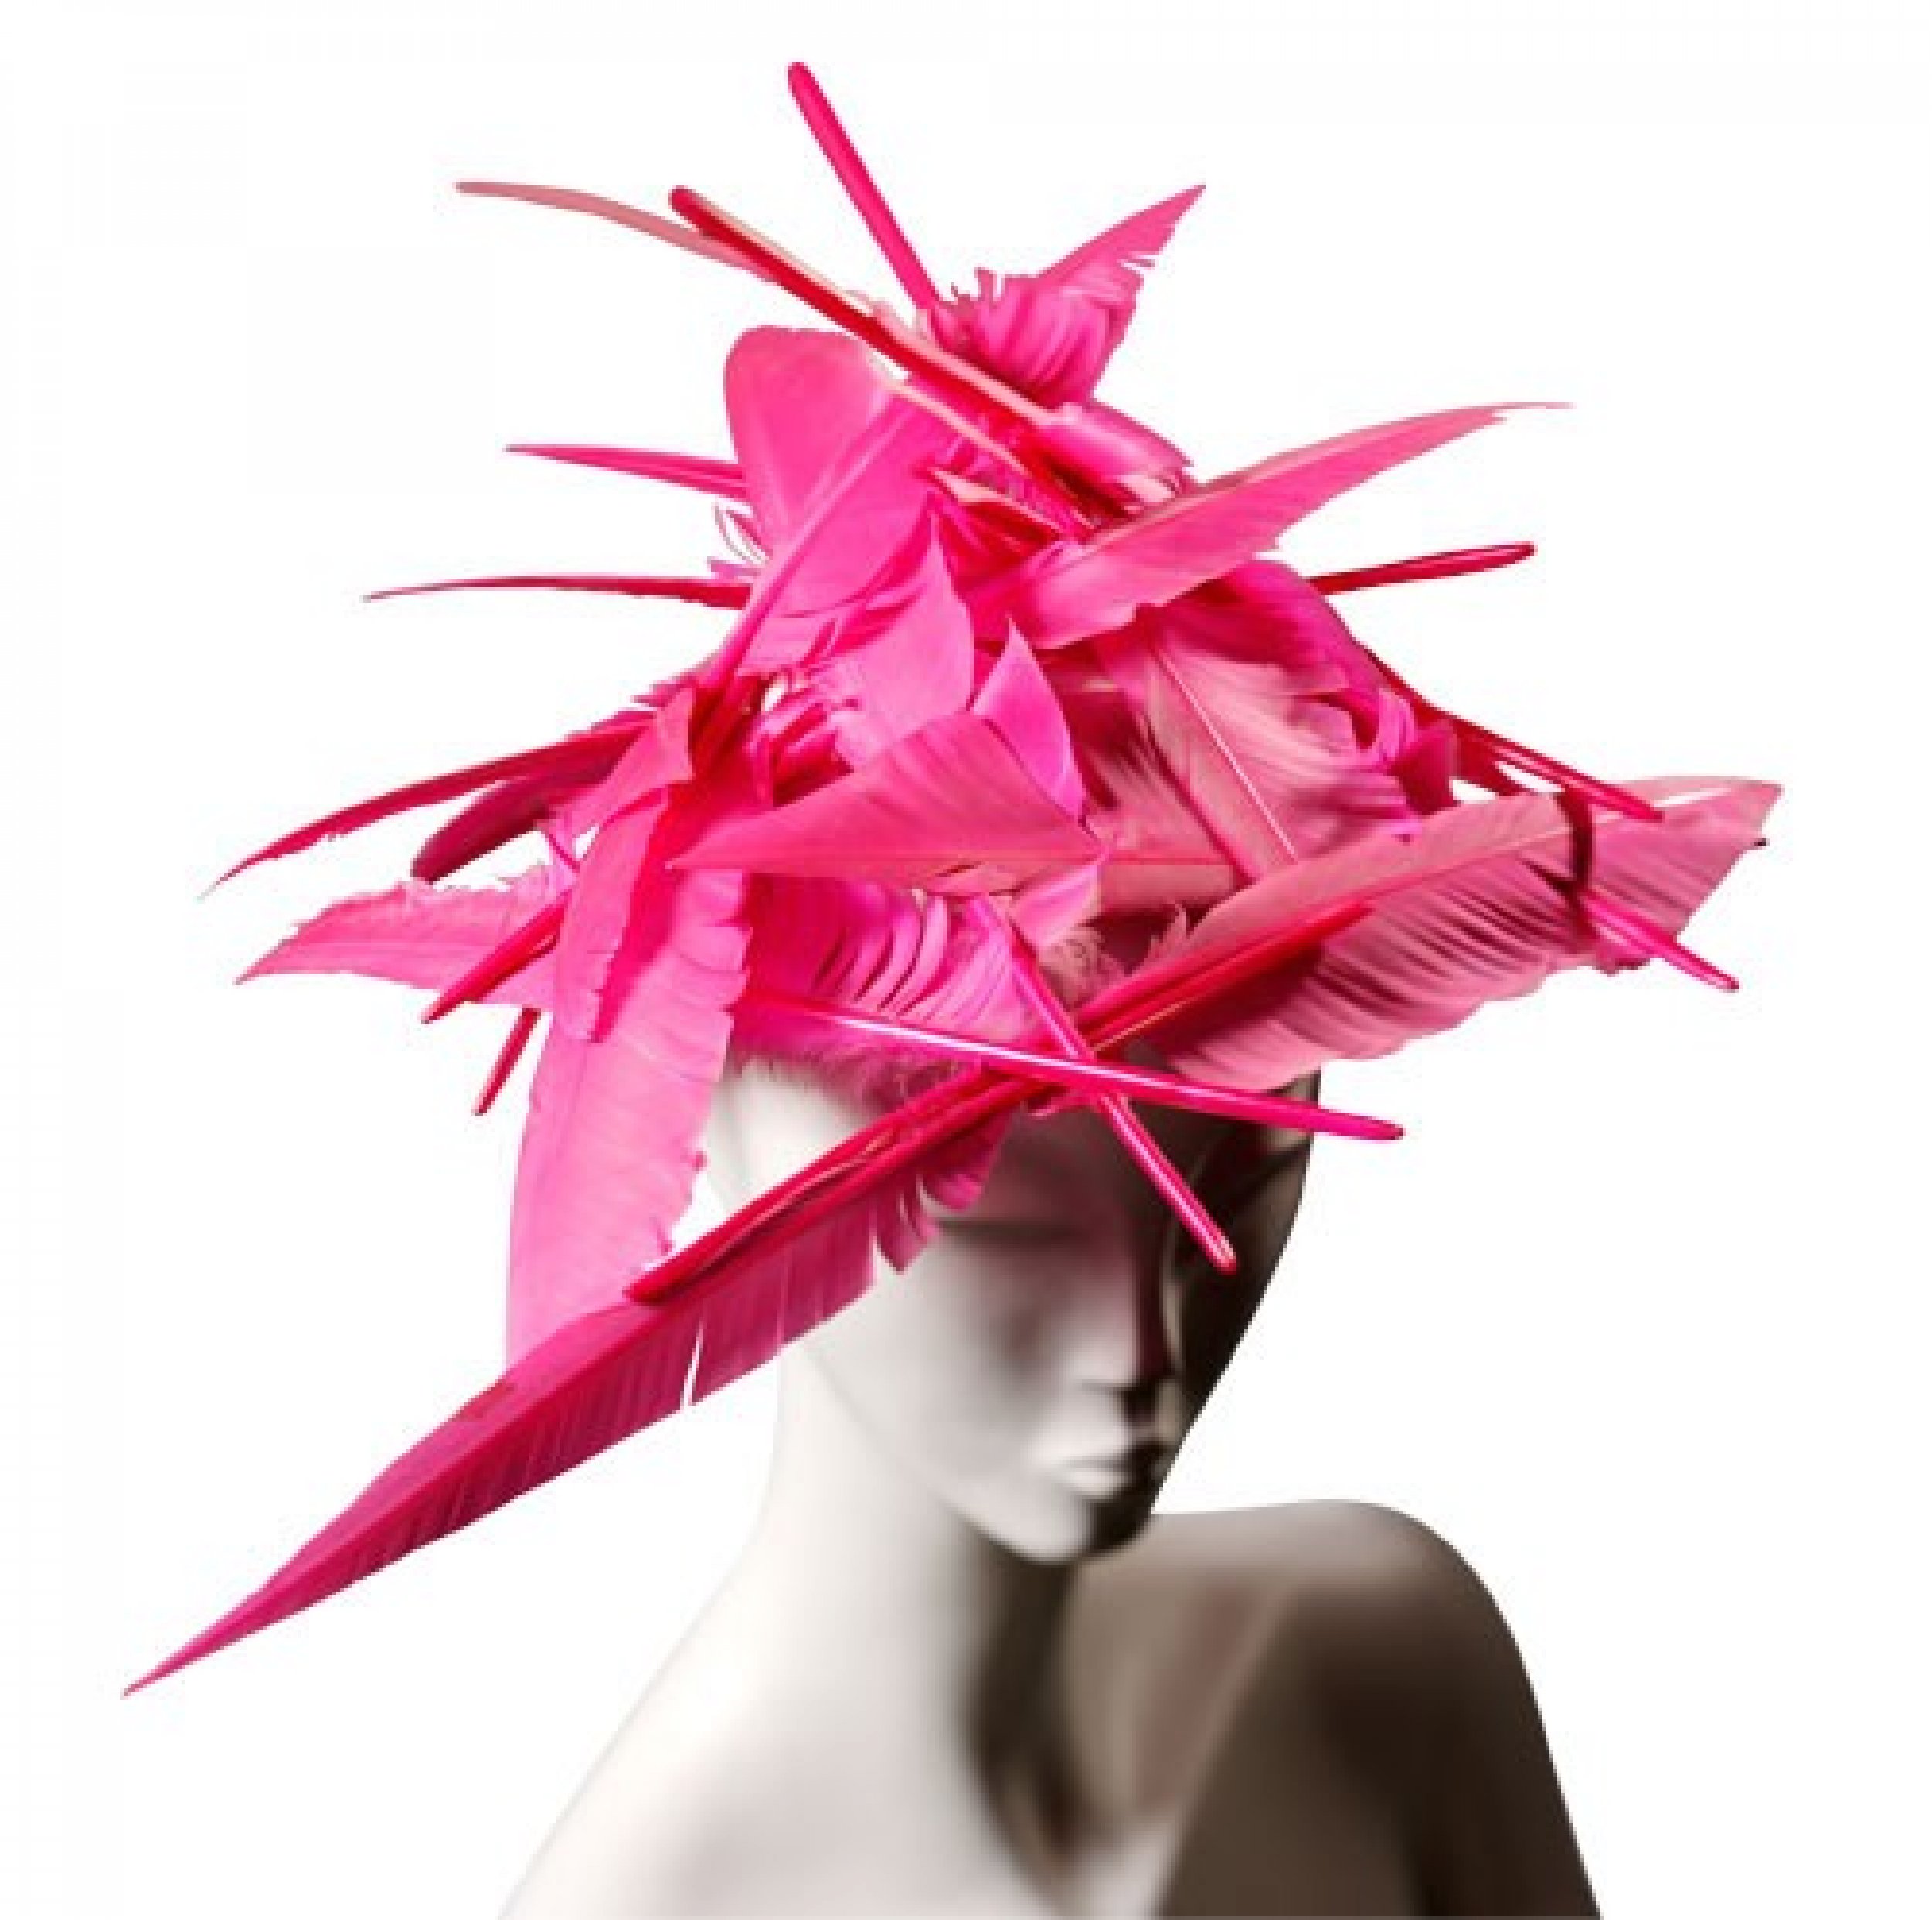 Stephen Jones and VA Museum Collaborate For Exclusive Millinery Display